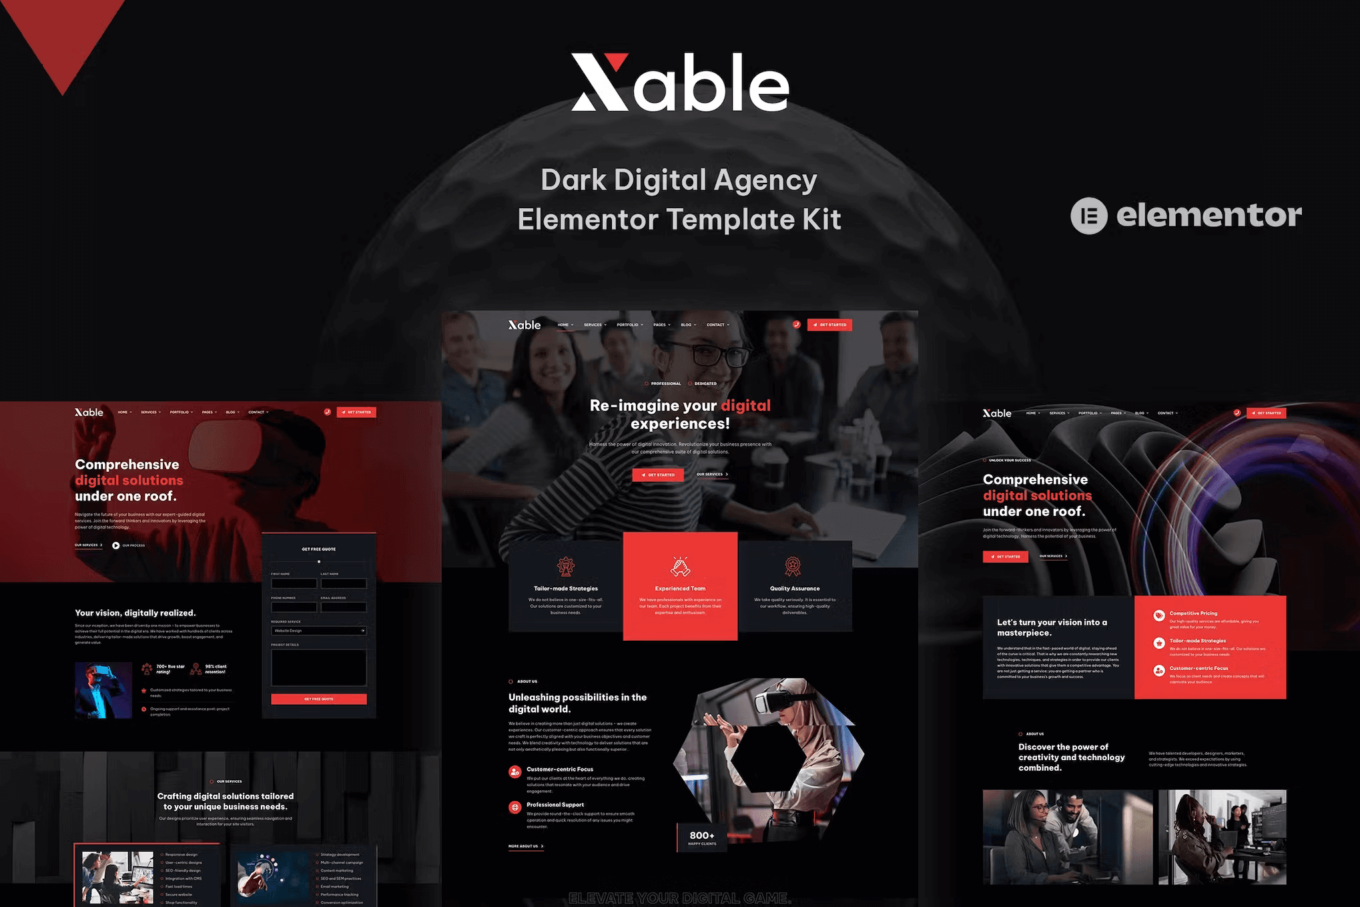 Most popular template kit: Xable by oxaart